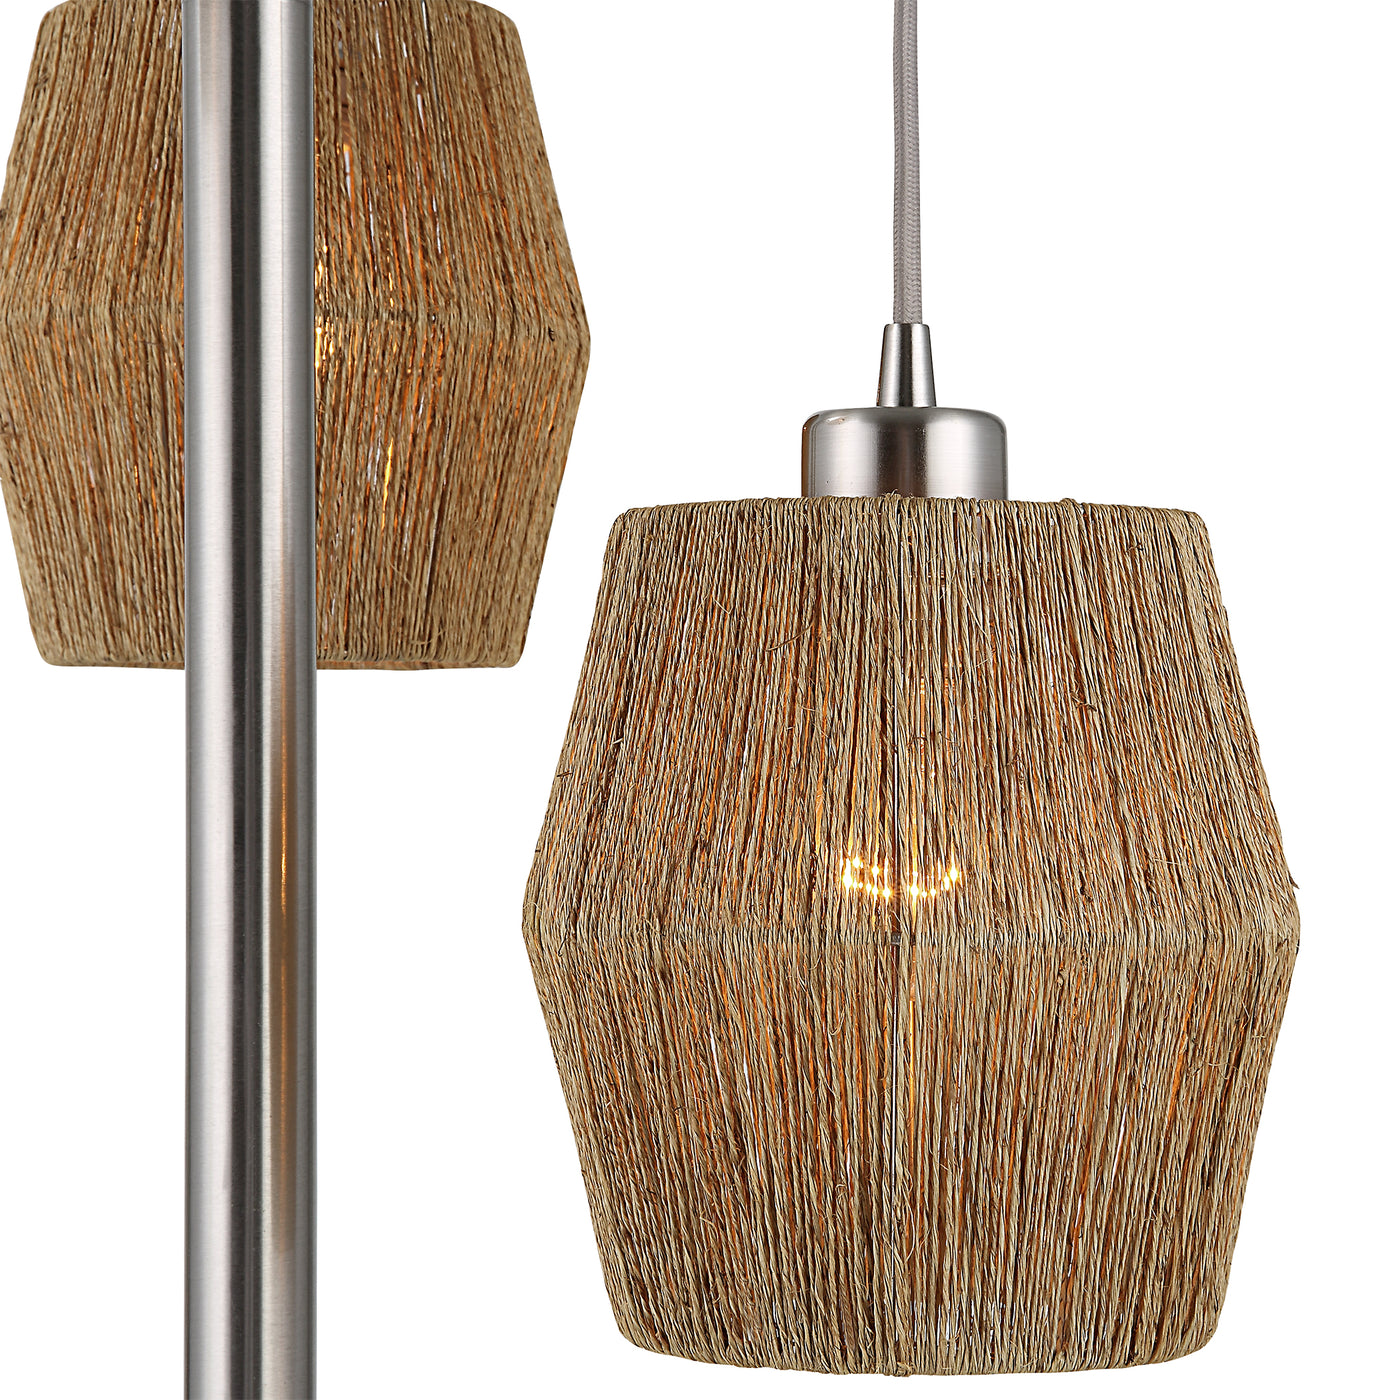 The Maldives - Pendant Floor Lamp With Brushed Nickel Stand and Woven Shades